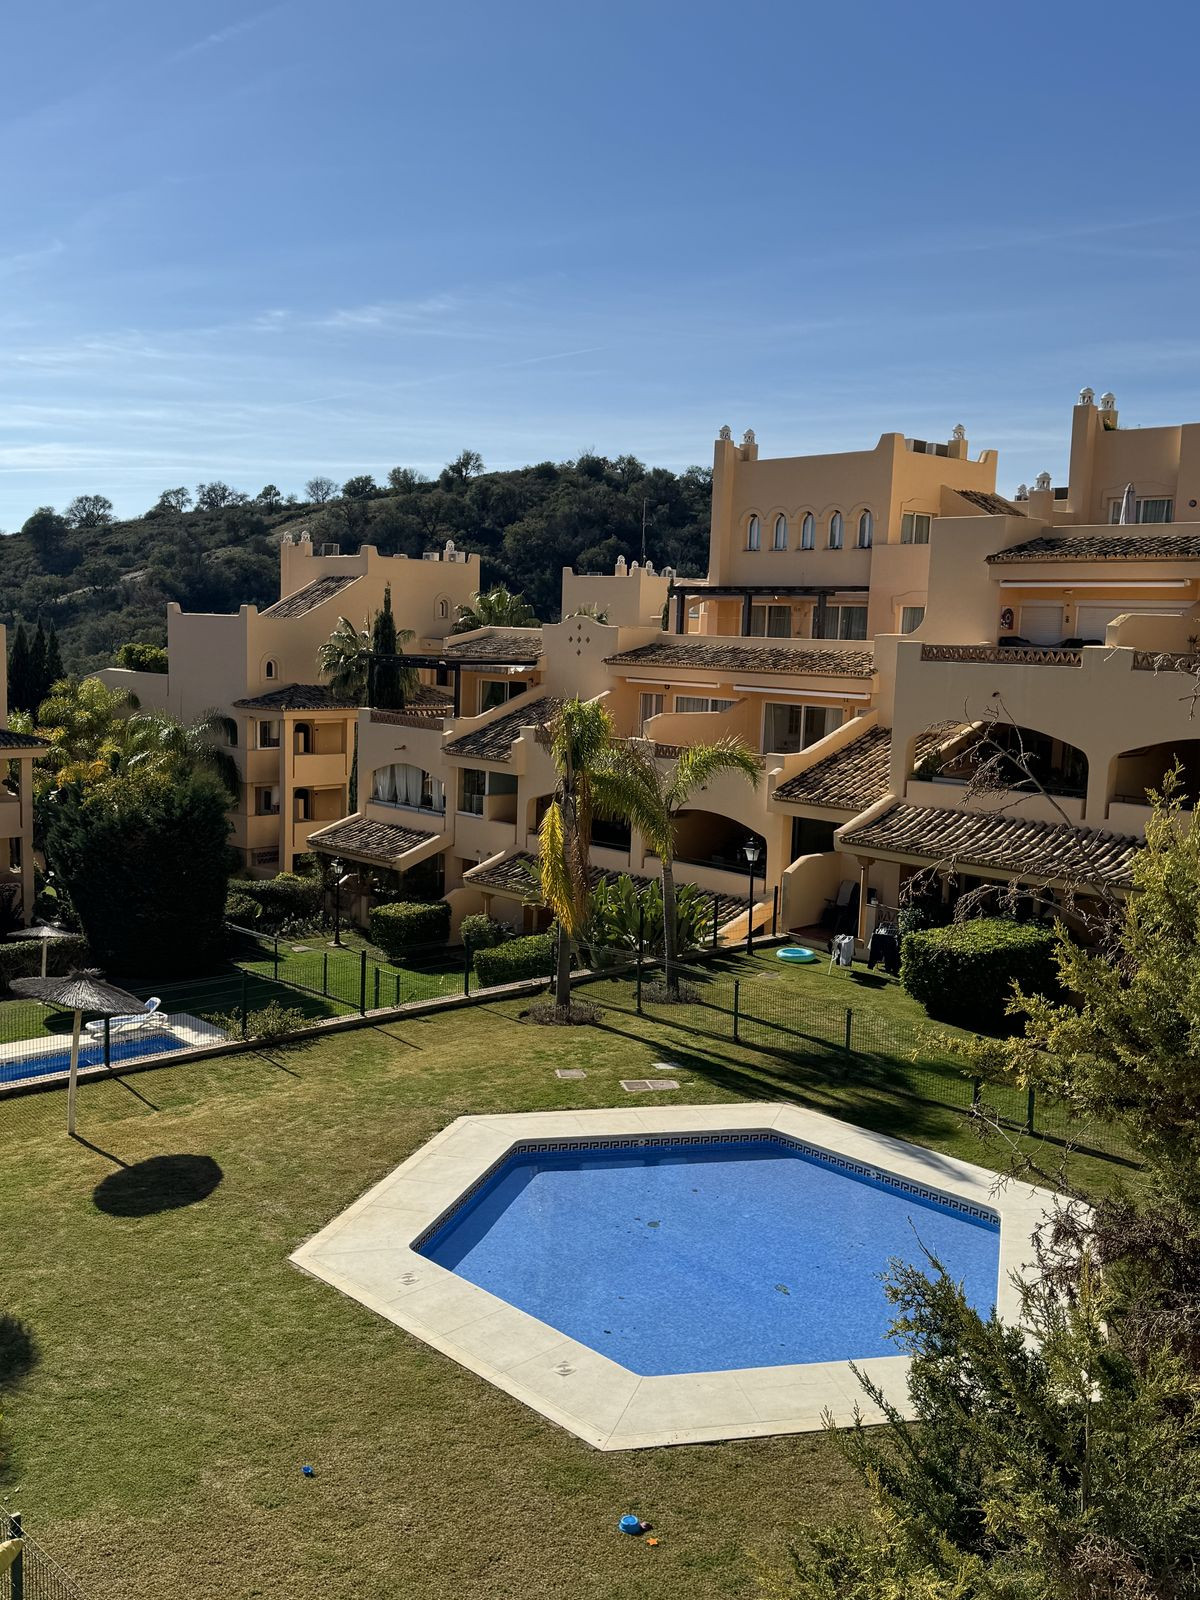 						Apartment  Middle Floor
													for sale 
															and for rent
																			 in Elviria
					